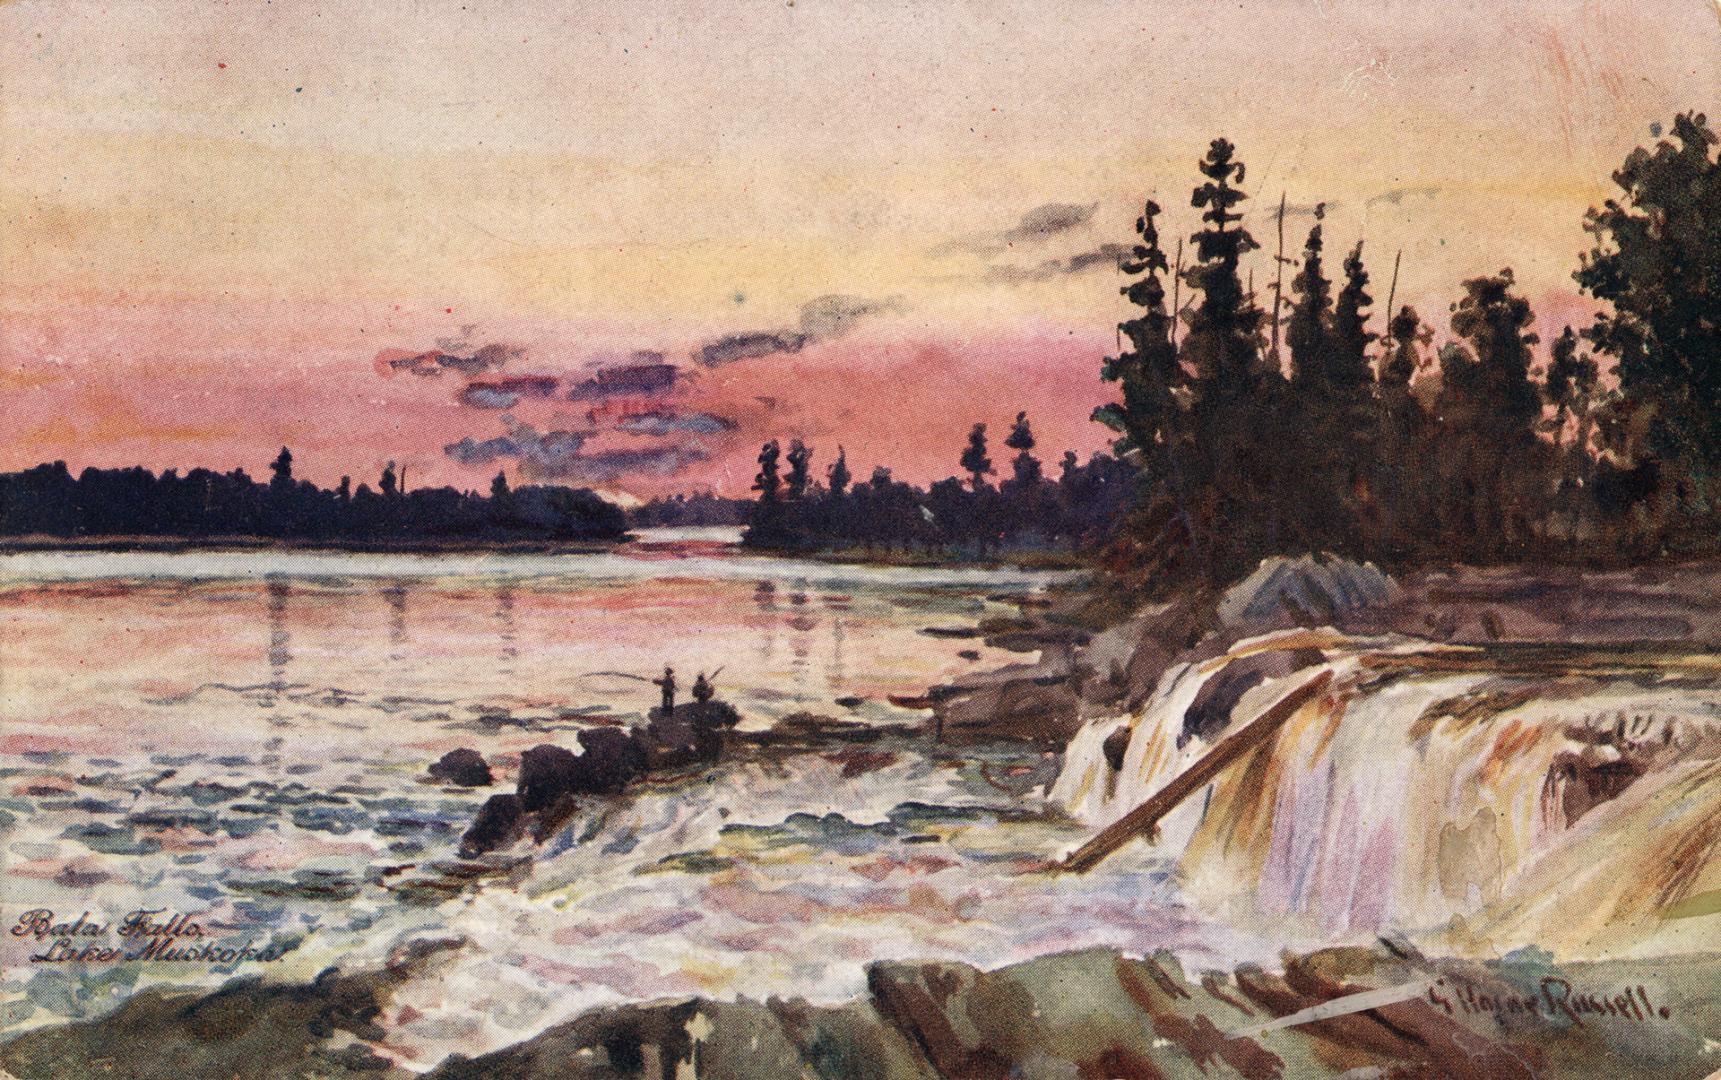 Painting by Russell of a sunset over a waterfall rushing over jagged rocks.